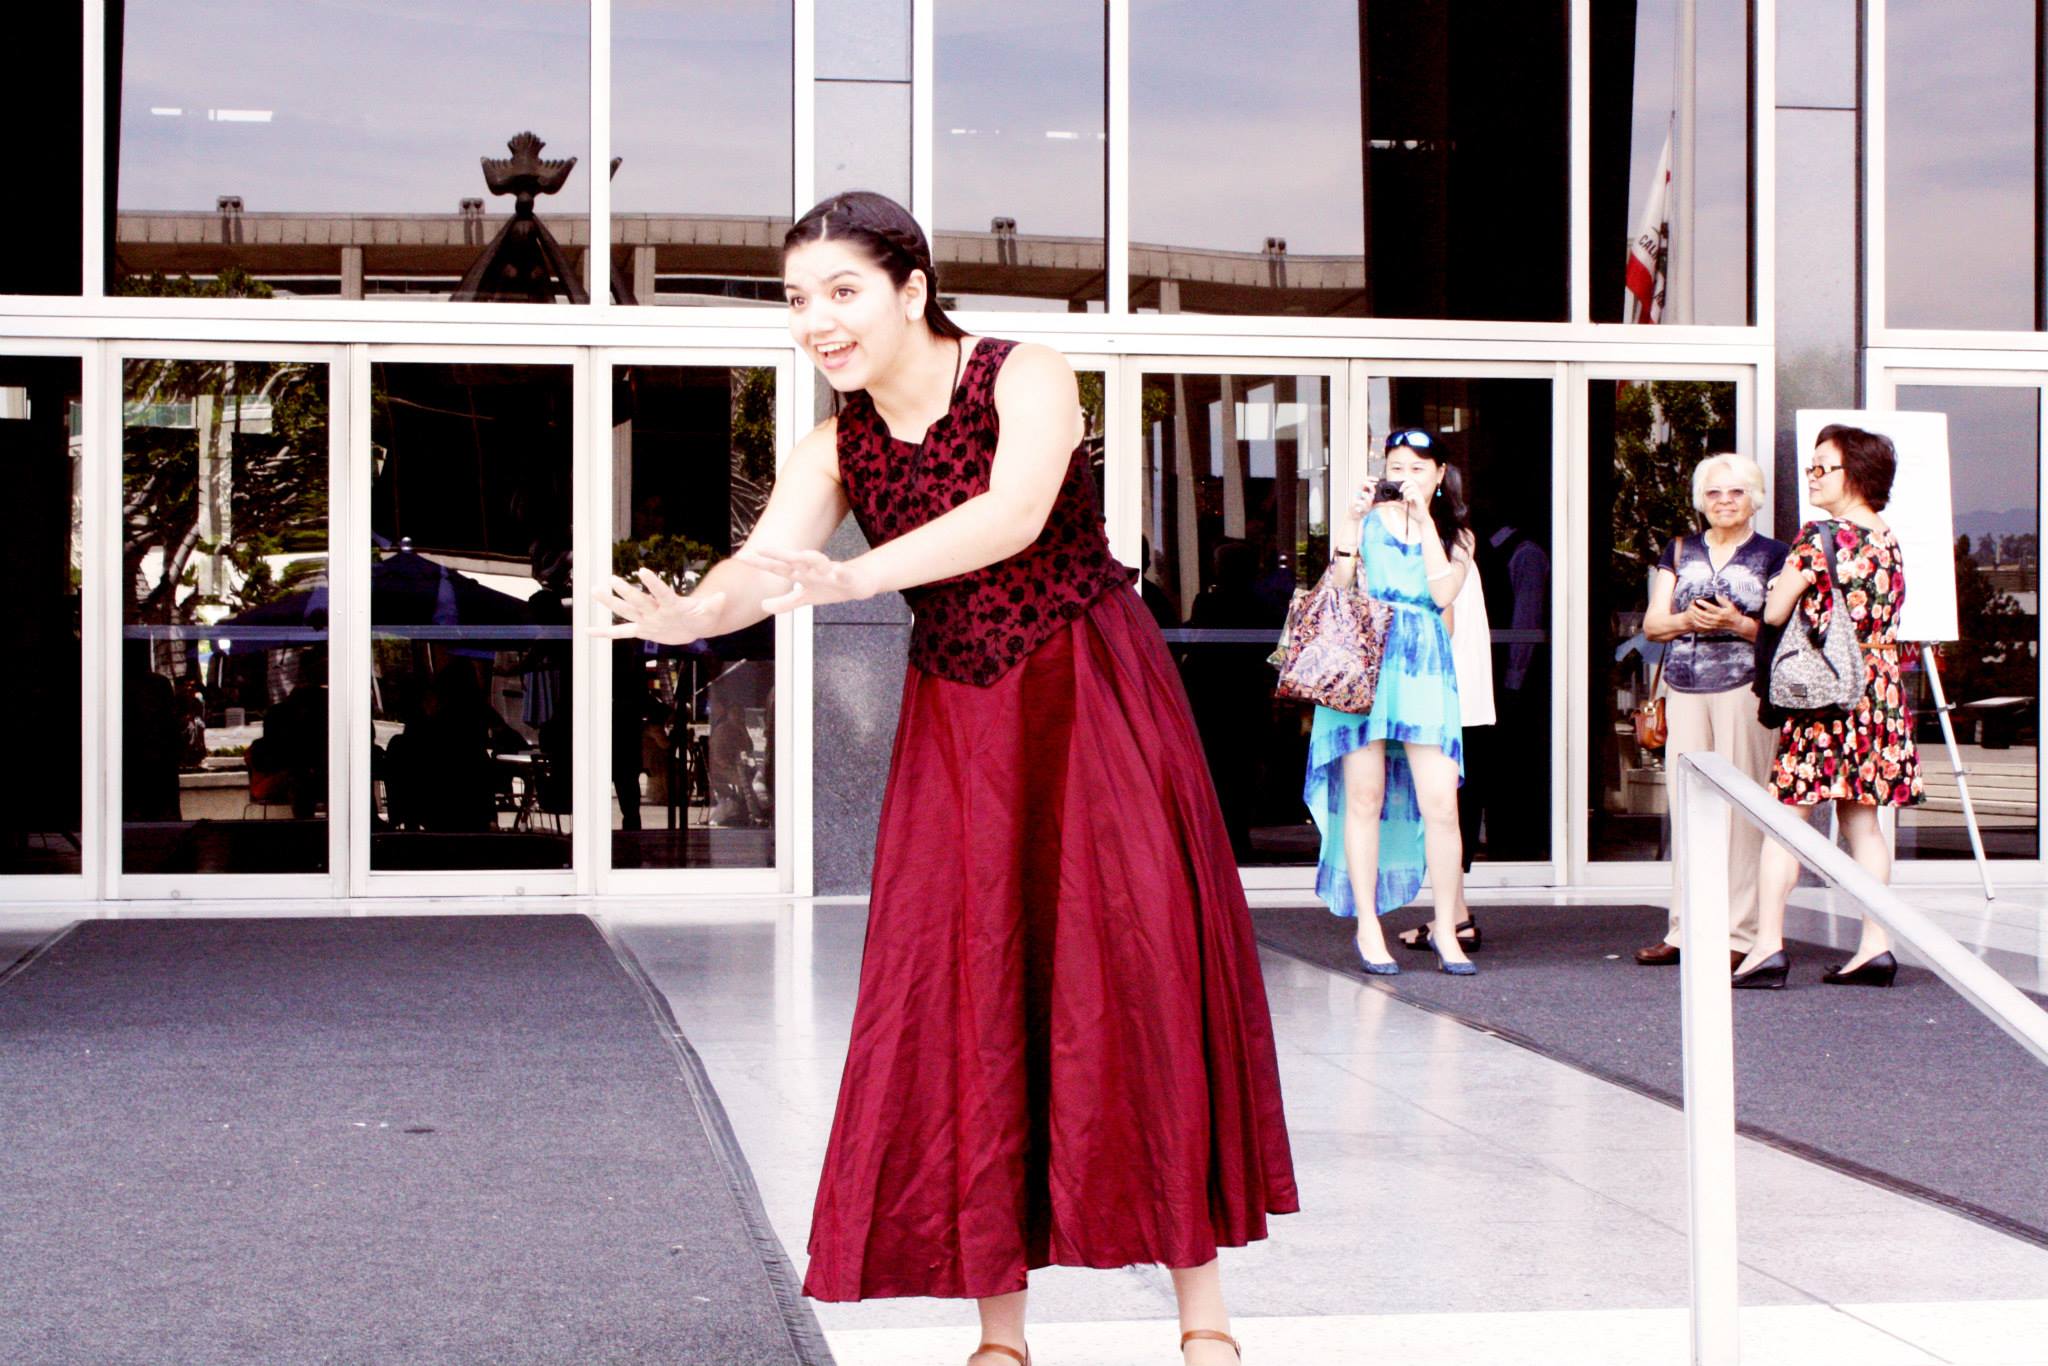 Performing a Juliet monologue at the Dorothy Chandler Pavilion